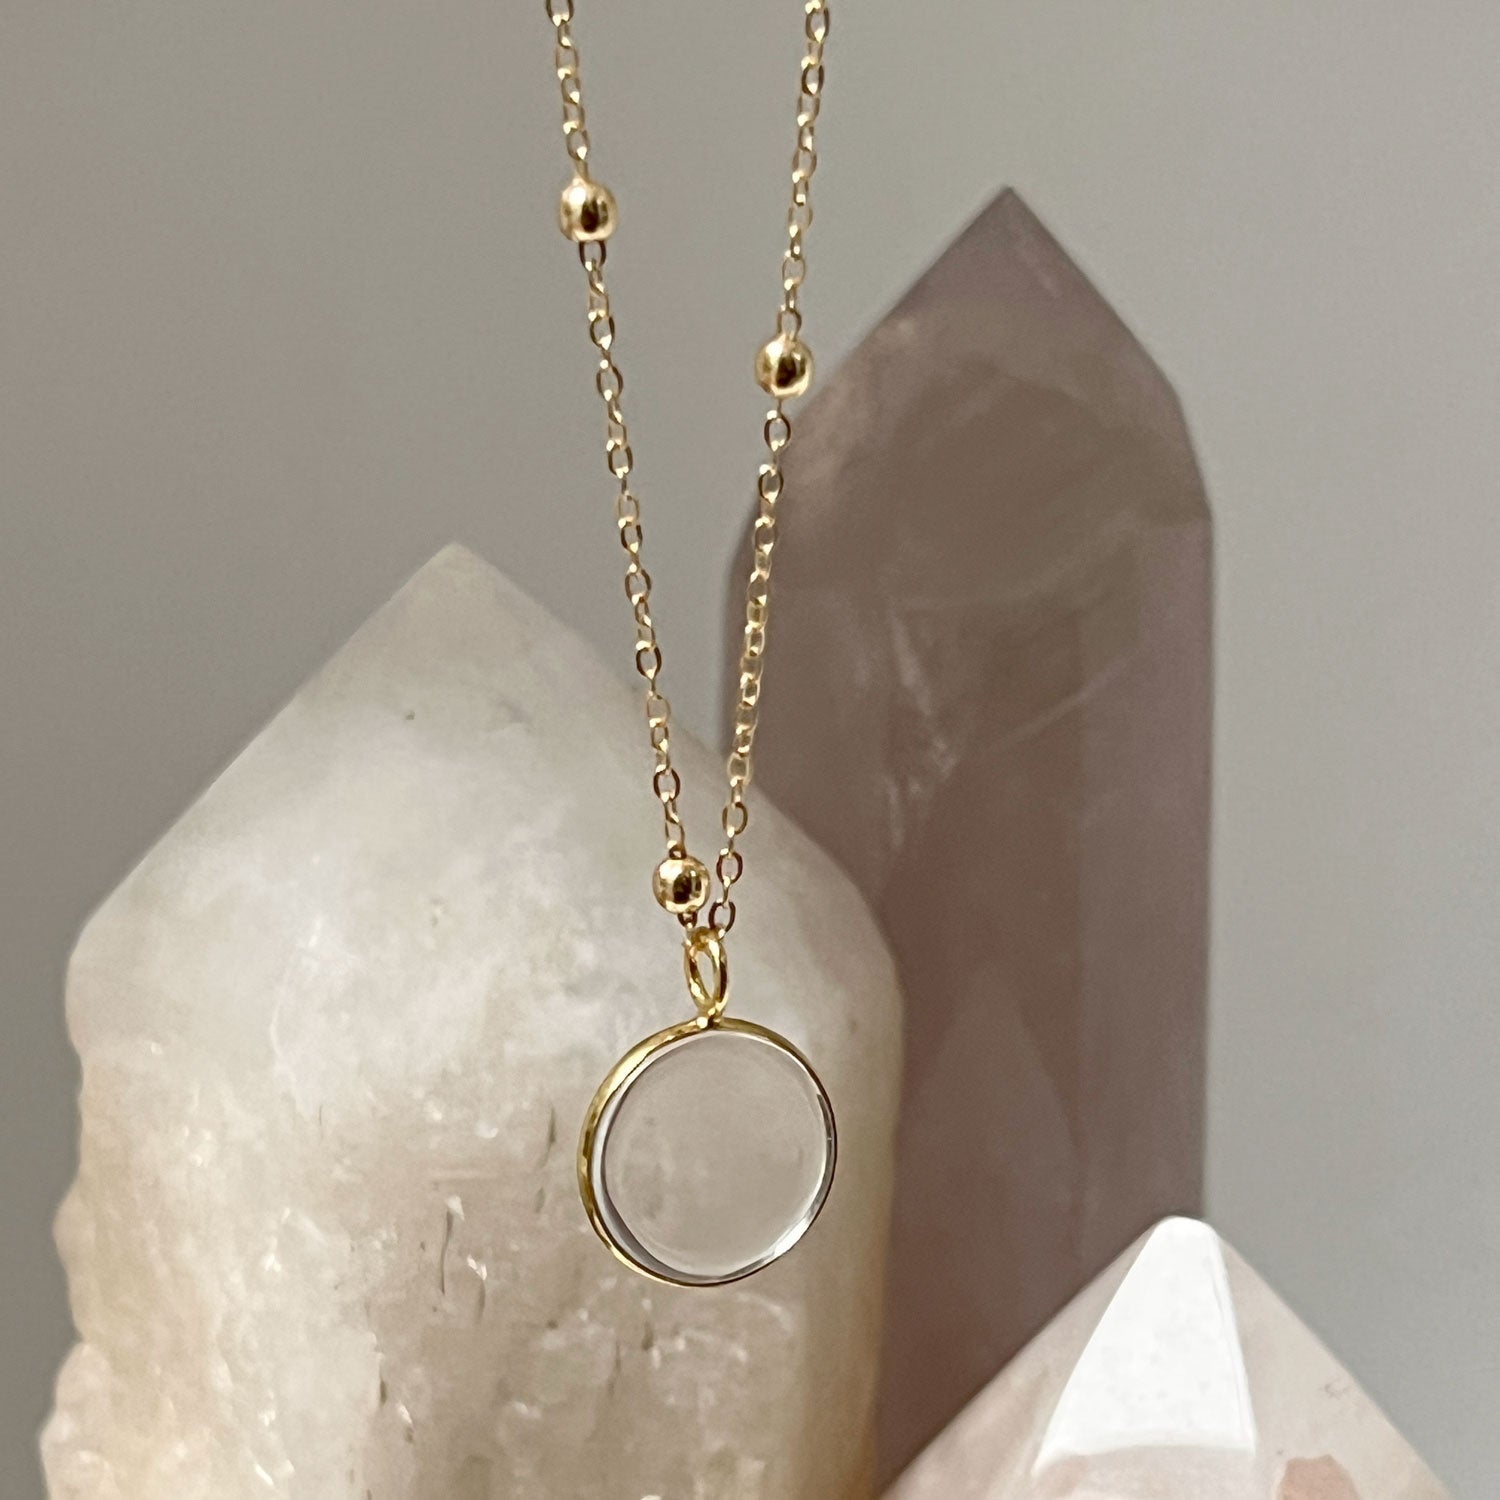 Rock Crystal Coin Pendant with chain options